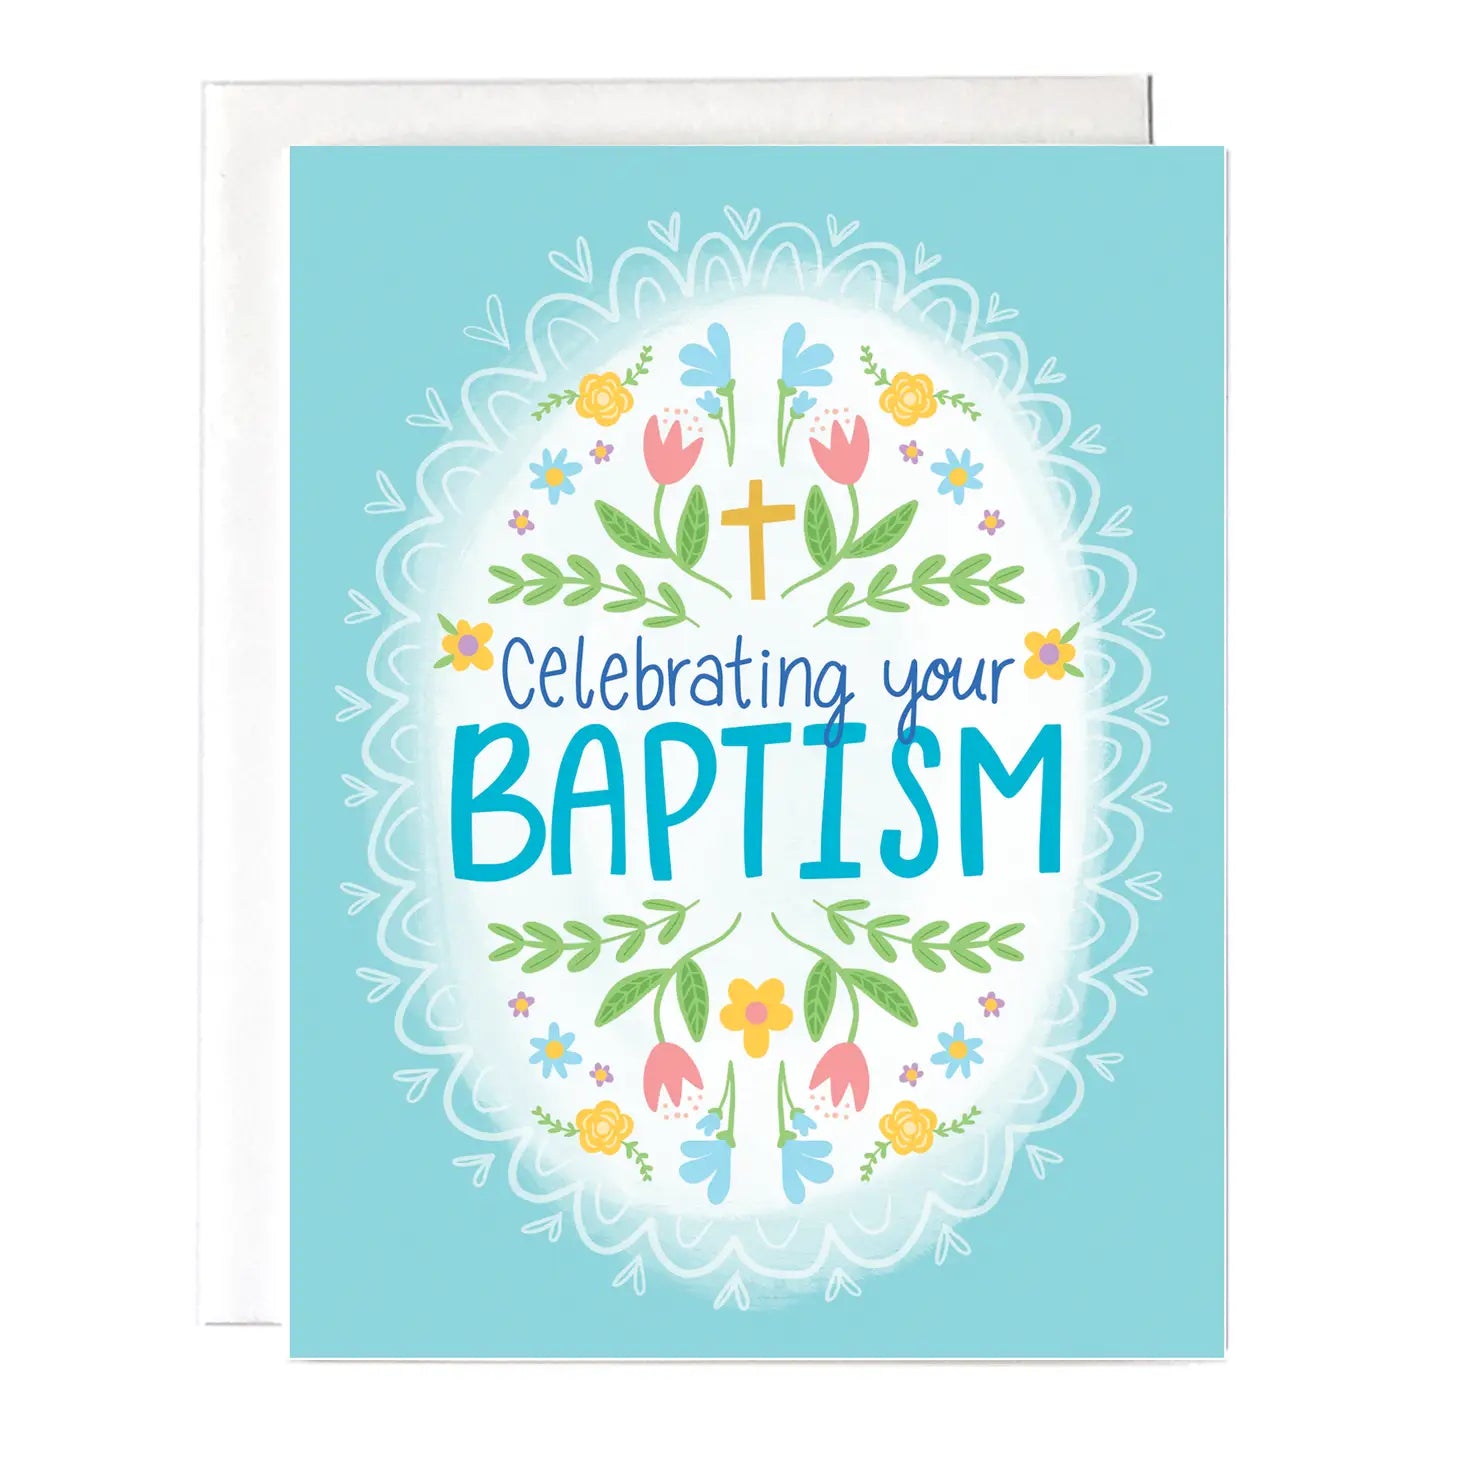 light bright blue card with white oval and spring floral designed greating card that reads "Celebrating your Baptism"